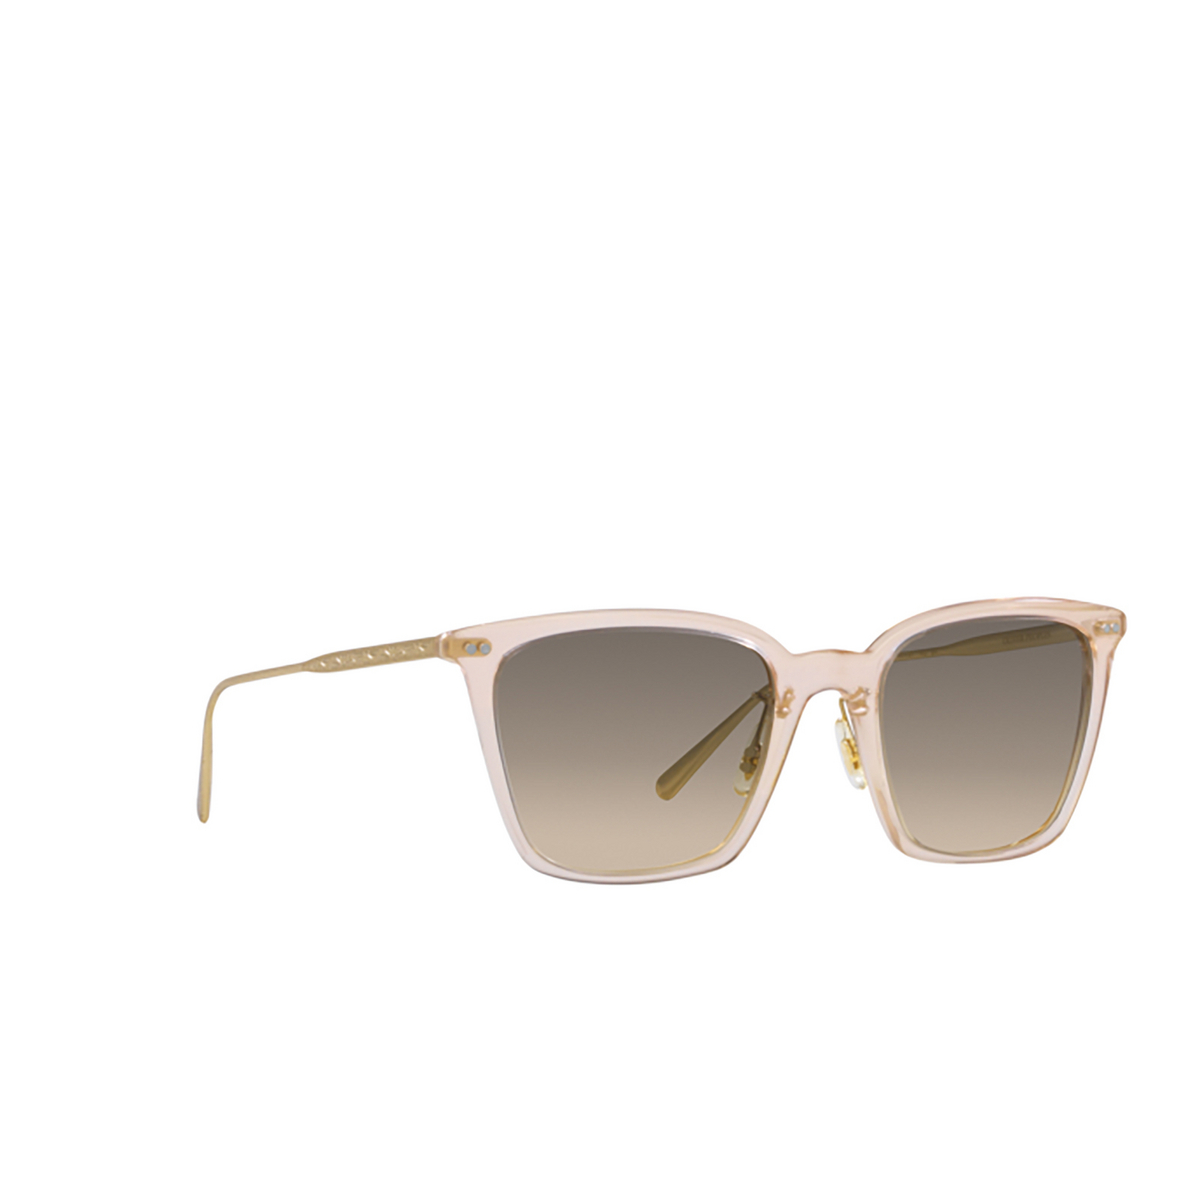 Oliver Peoples LUISELLA Sunglasses 176732 Cipria / Brushed Gold - three-quarters view